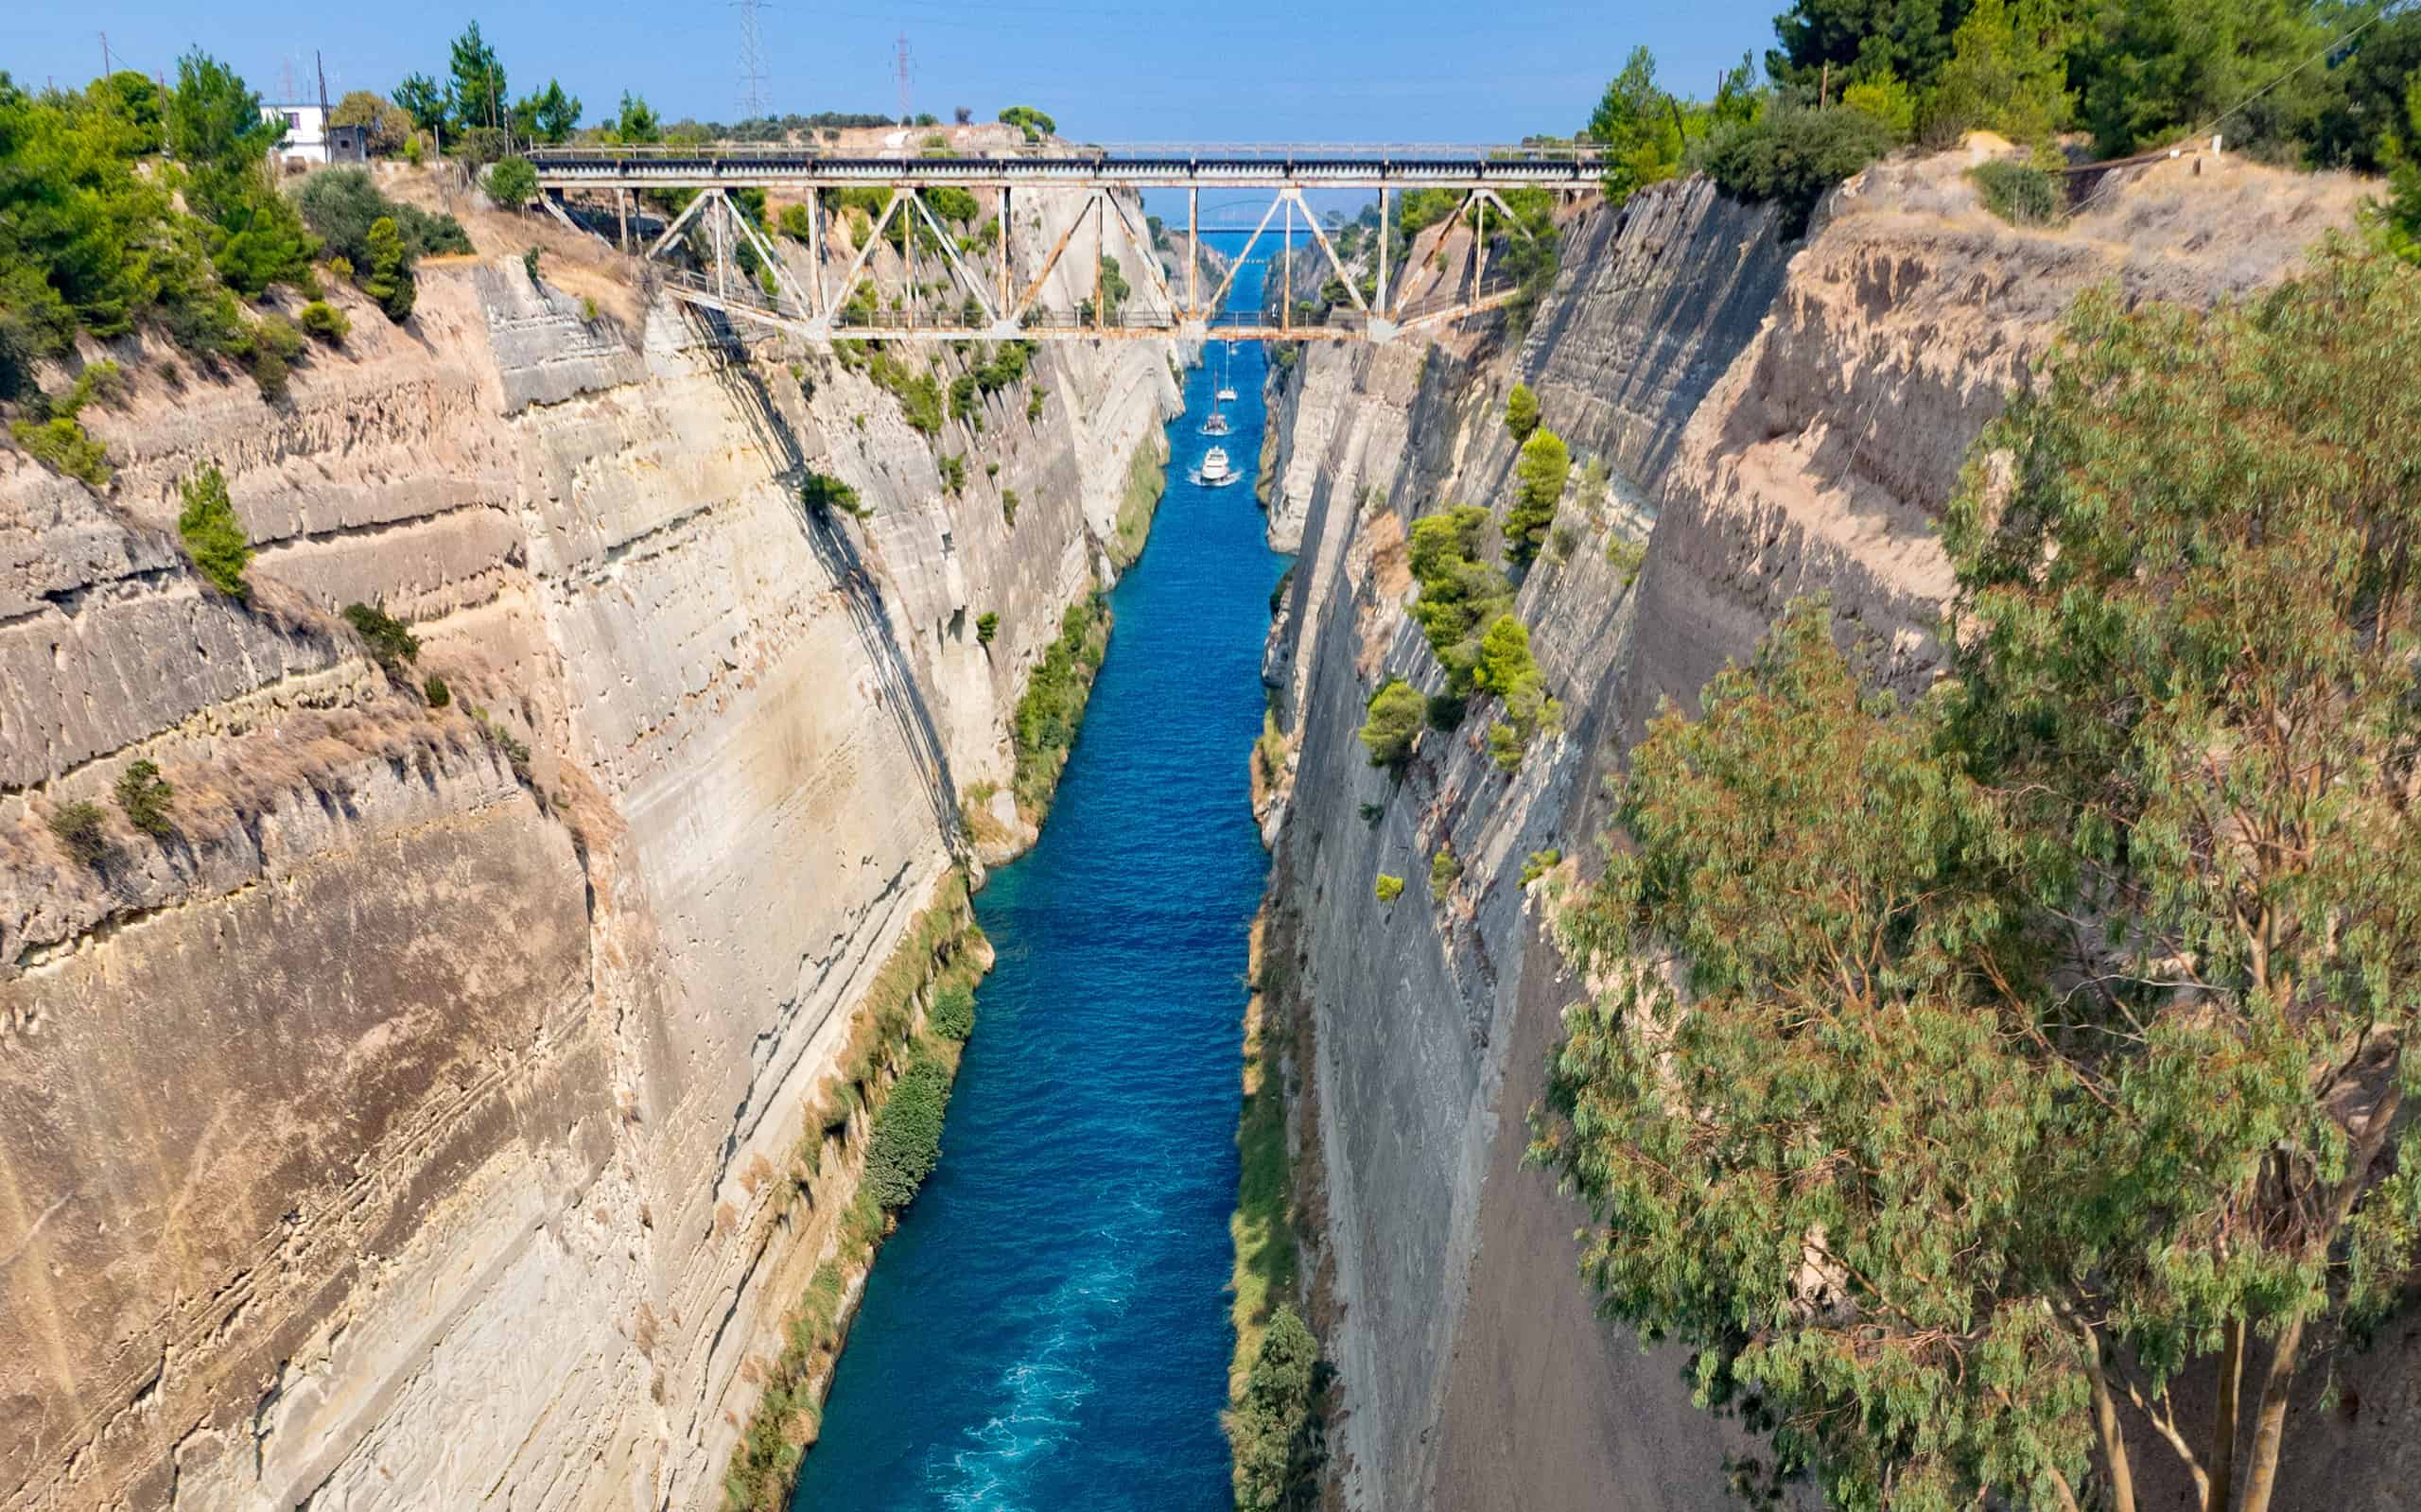 View from the bridge to the boats and View from the bridge to the boats and yachts passing through the Corinth Canal from a sunny day on Peloponnese in Greece